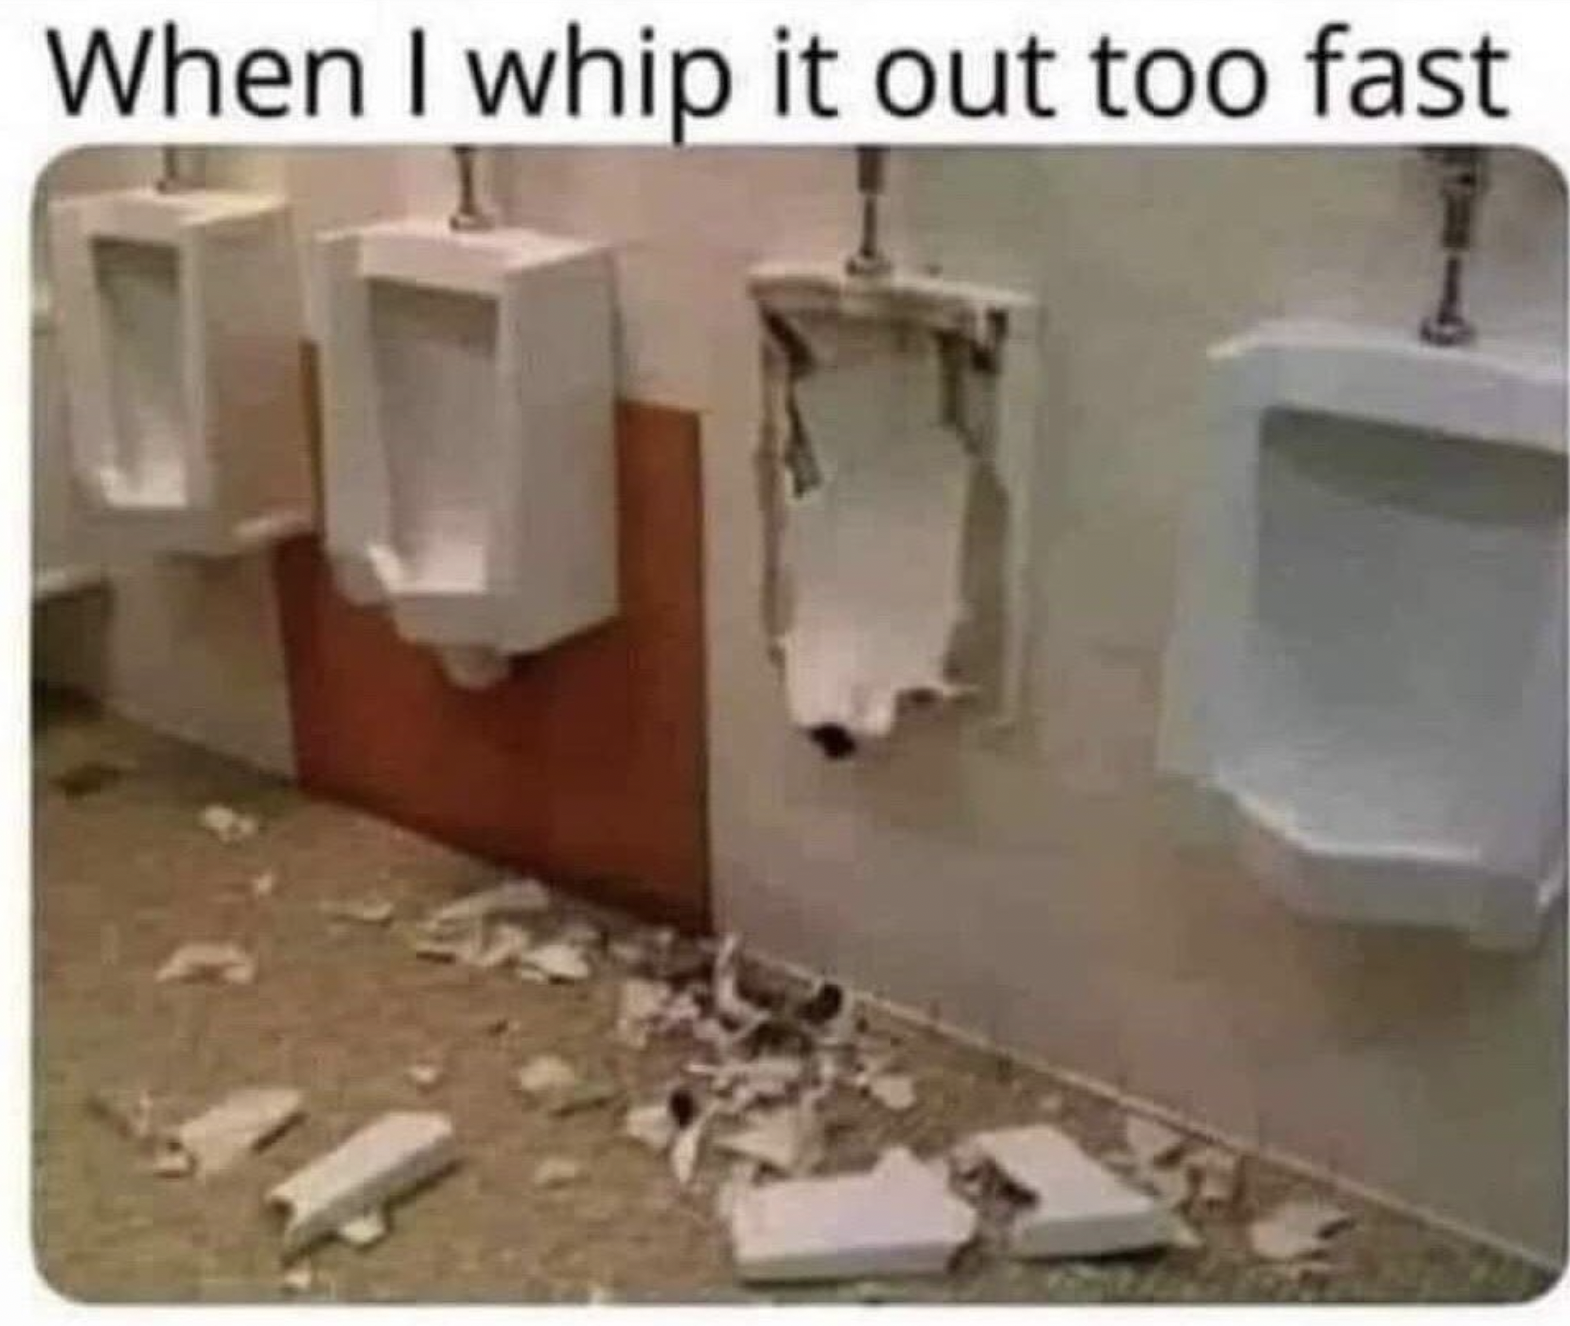 toilet - When I whip it out too fast